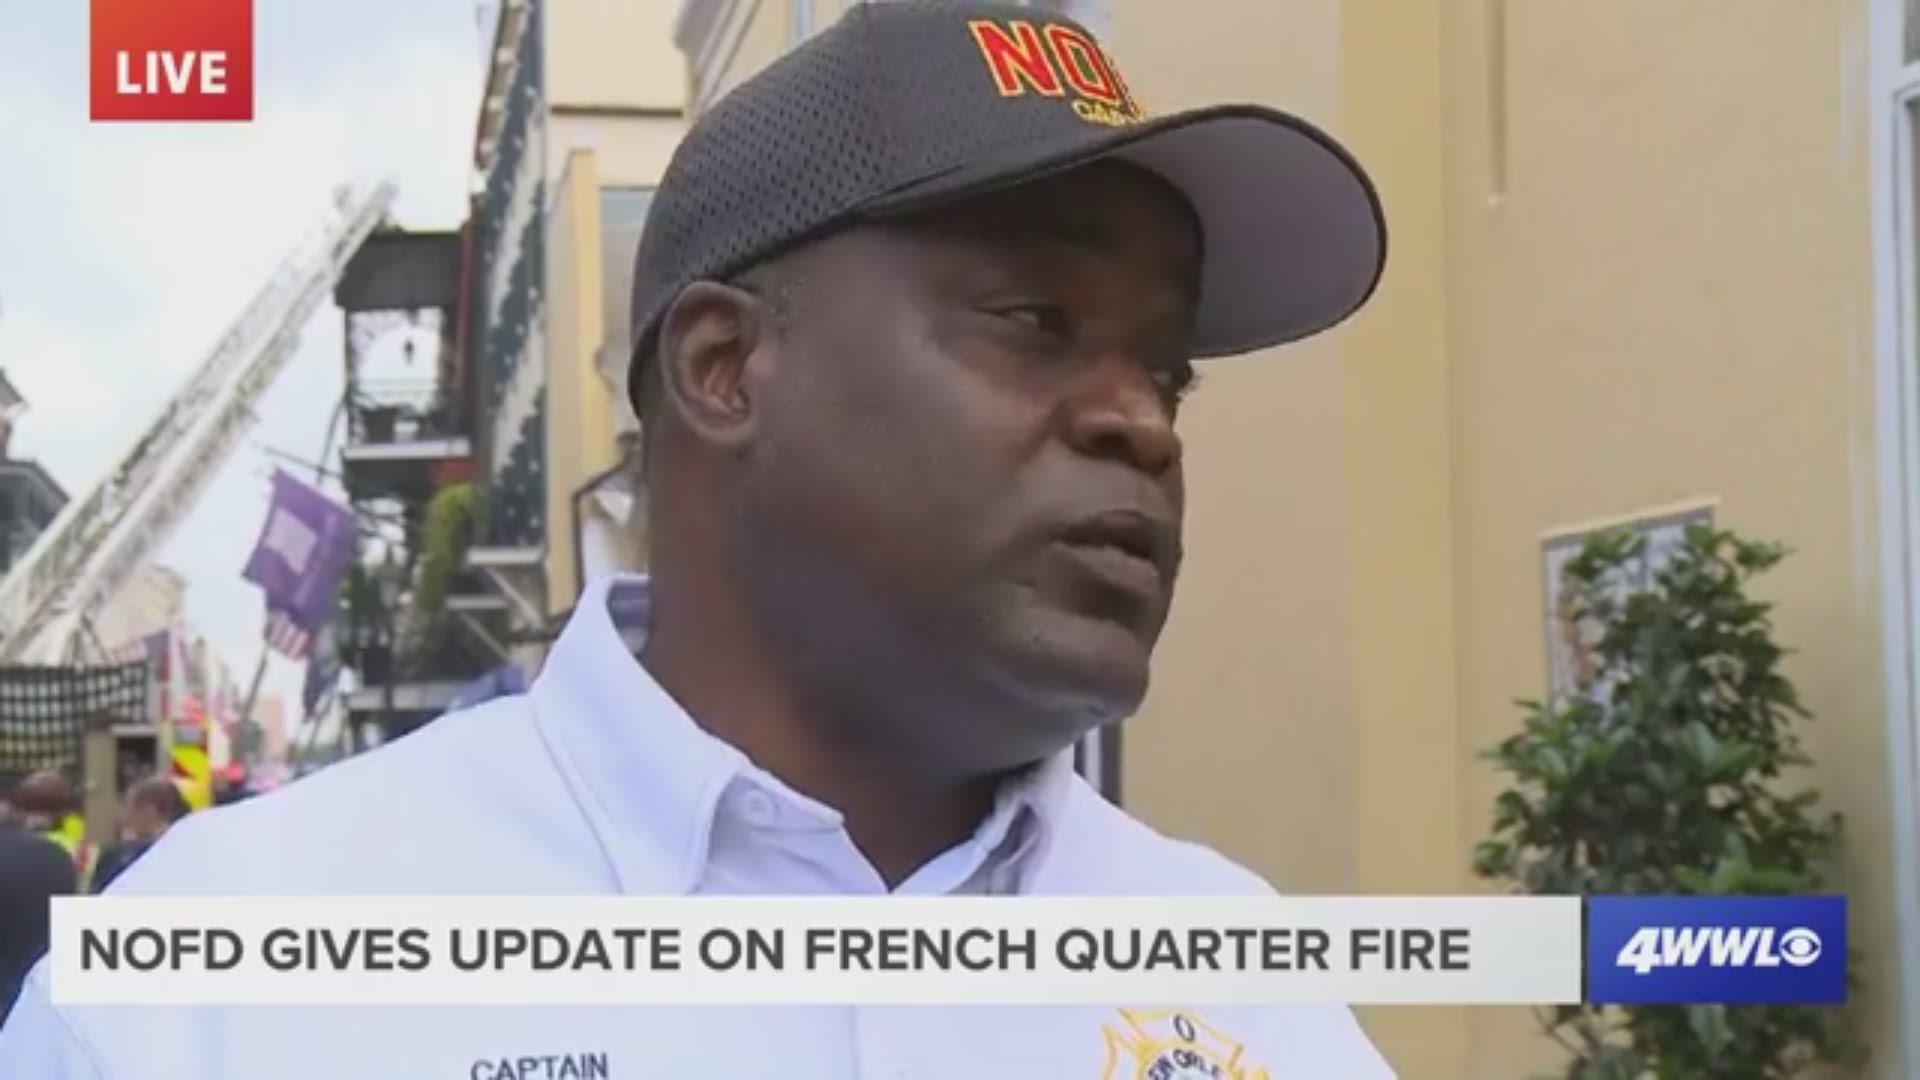 A five-alarm fire broke out in a French Quarter restaurant early Saturday, sending workers scurrying and closing down traffic to what is normally a busy block of eateries.